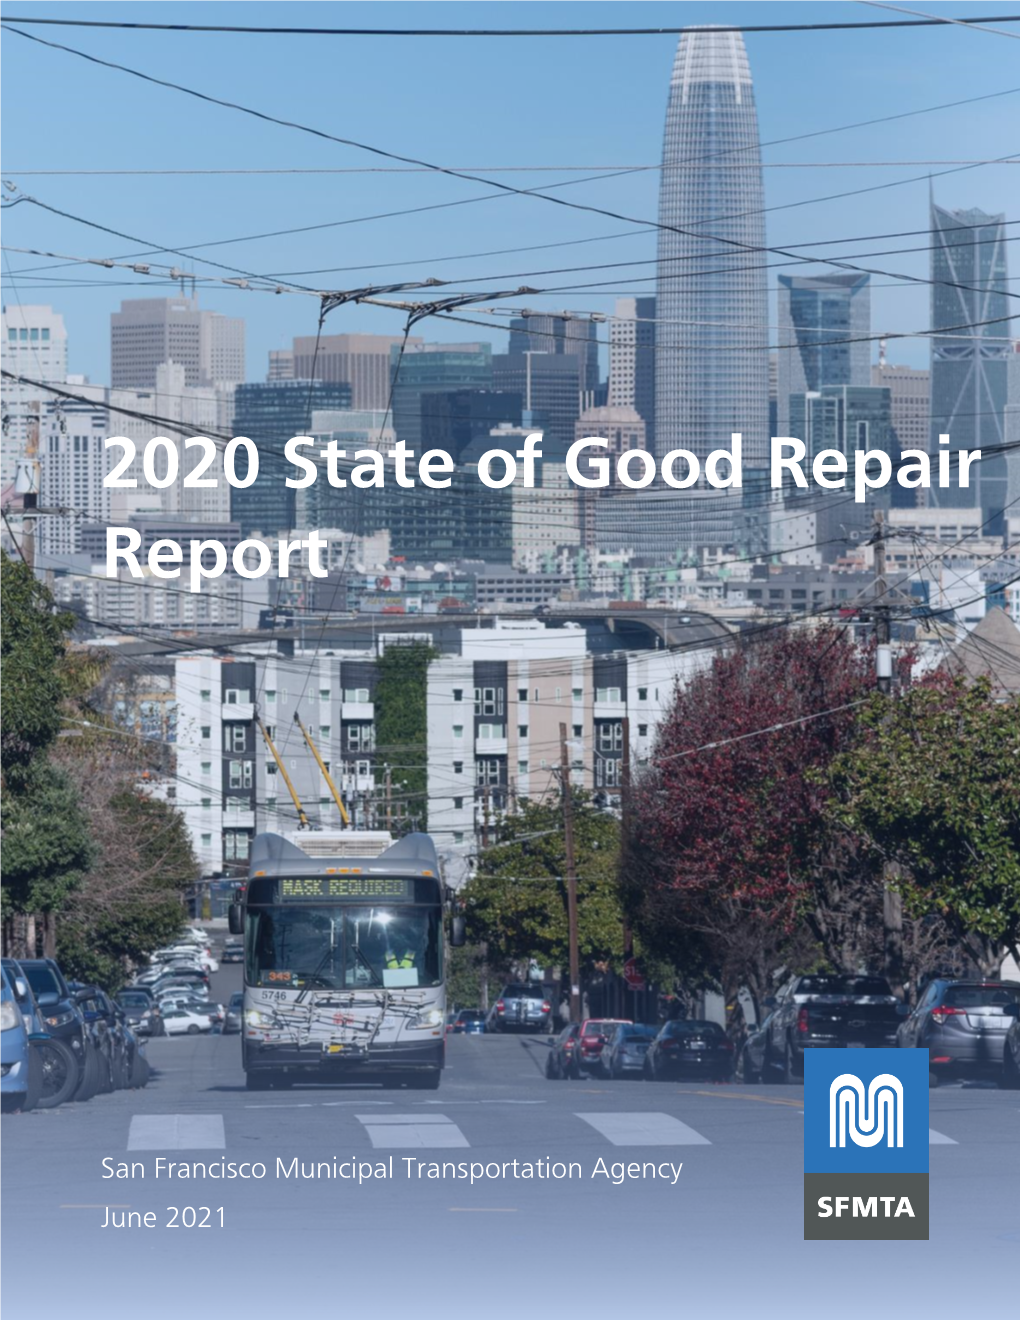 2020 State of Good Repair Report Provides an Overview of the Agency’S Rehabilitation and Replacement Needs and Investments